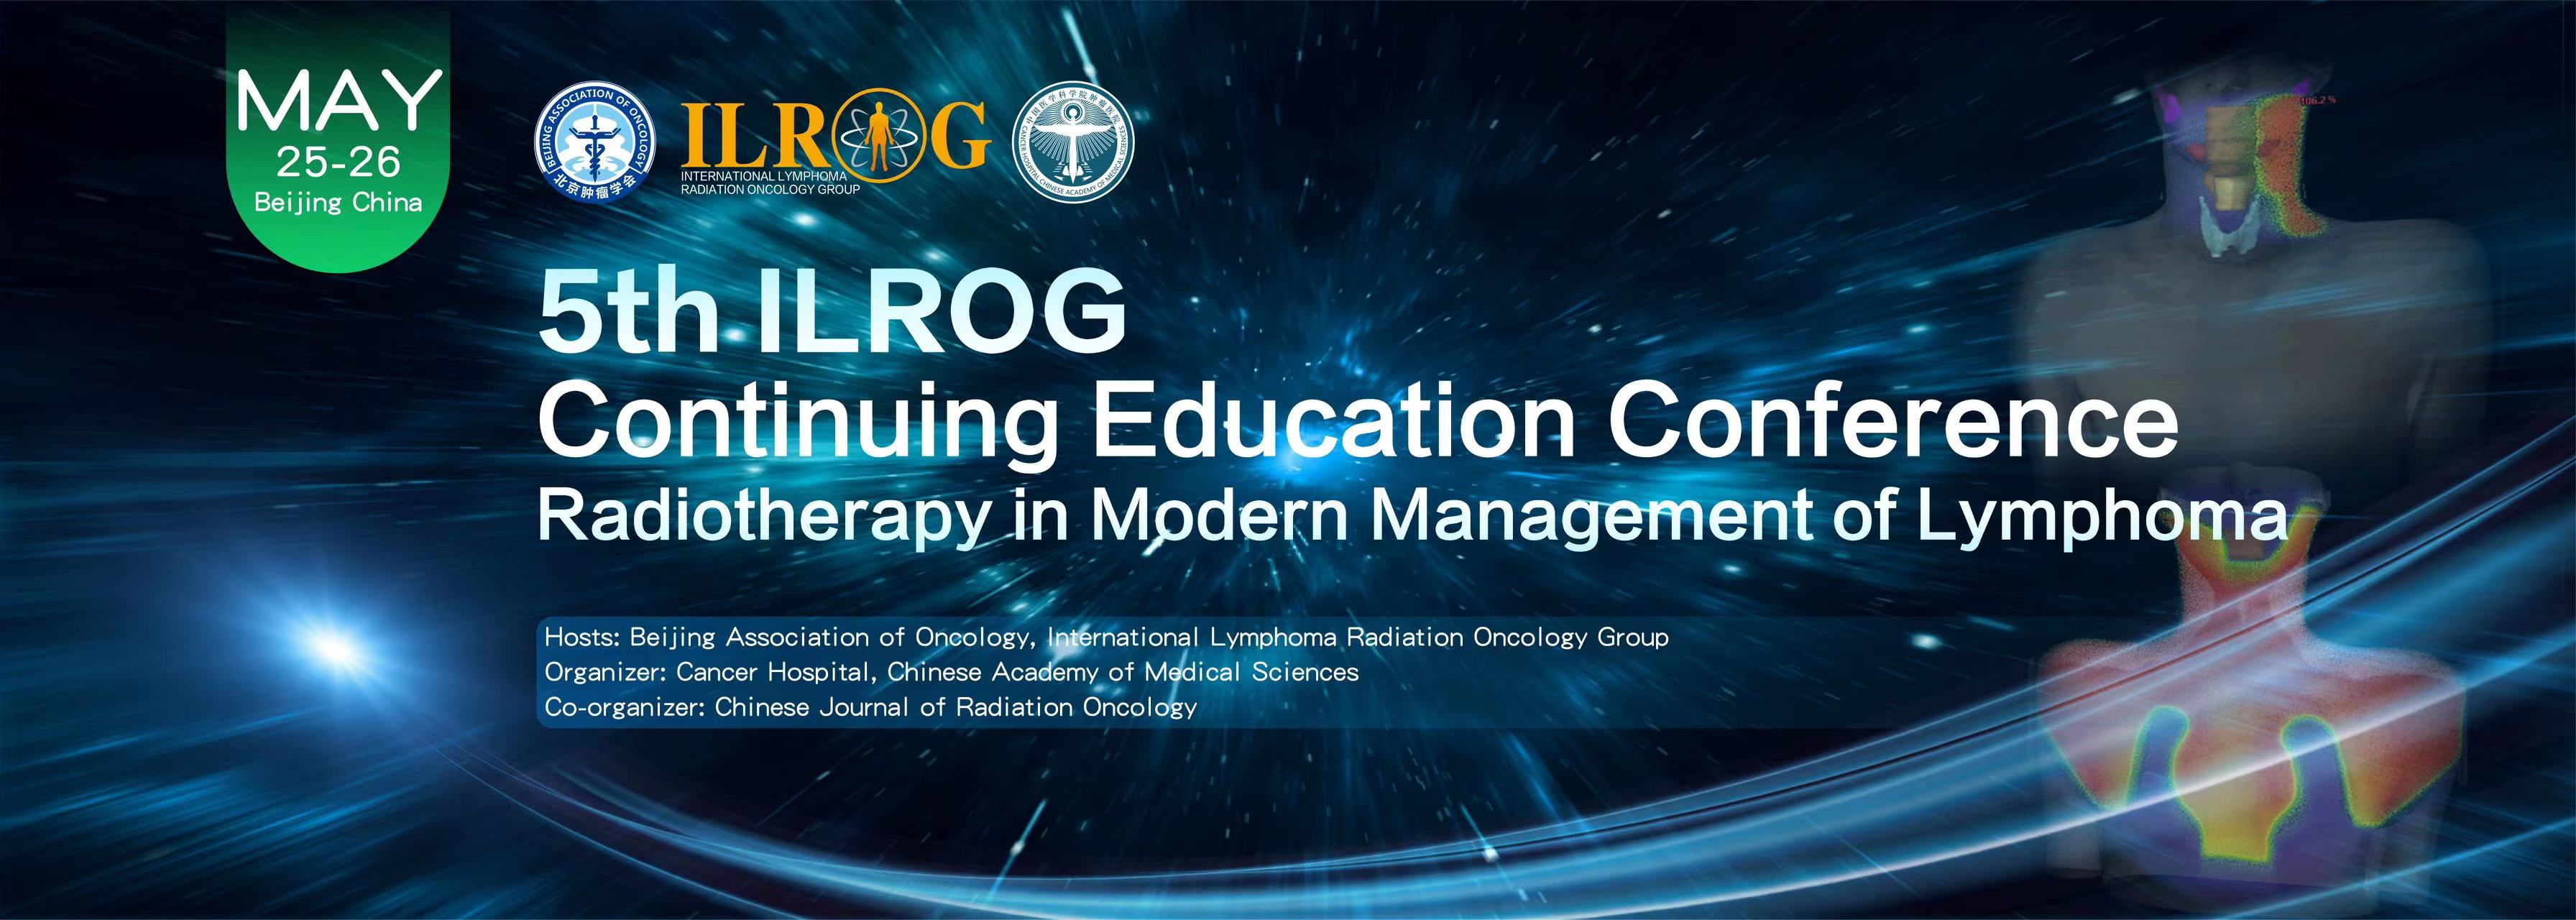 5th ILROG Continuing Education Conference  -  Radiotherapy in Modern Management of Lymphoma